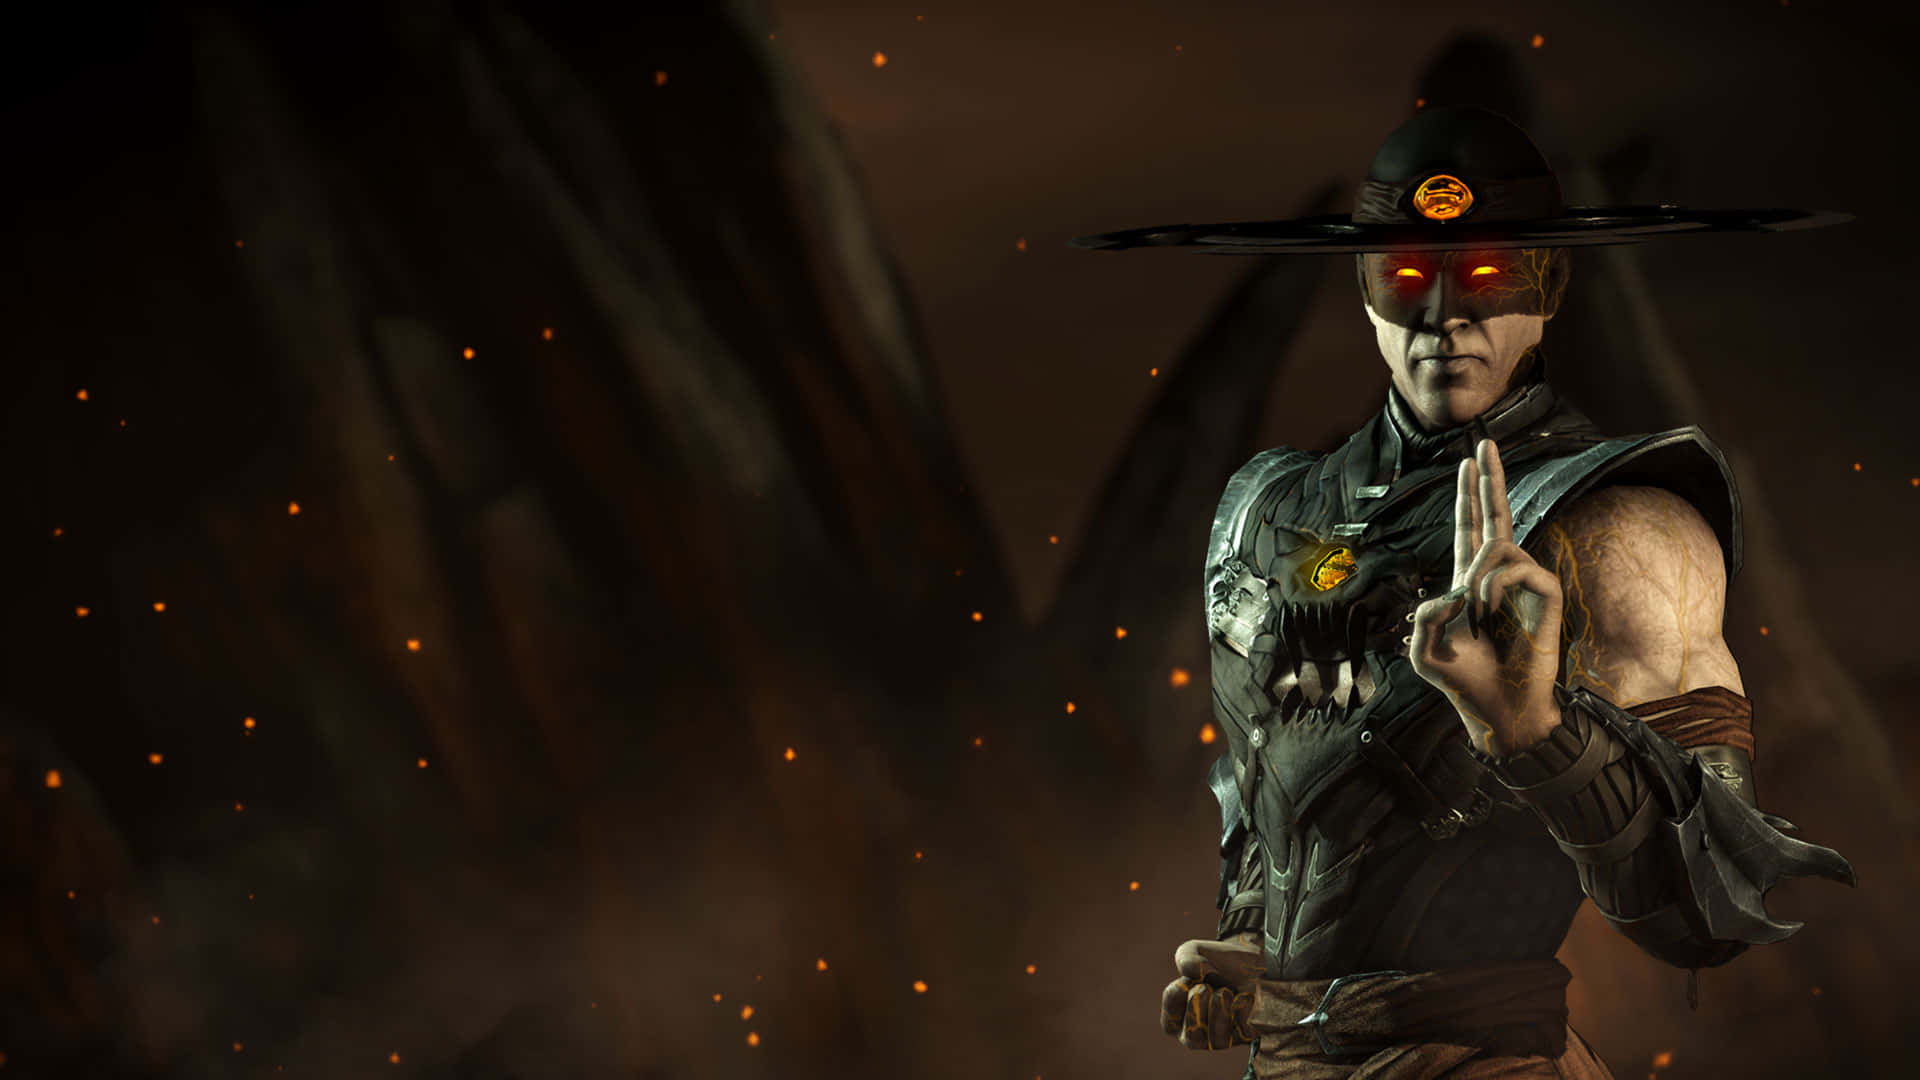 Caption: Intense Action With Kung Lao in Mortal Kombat Wallpaper